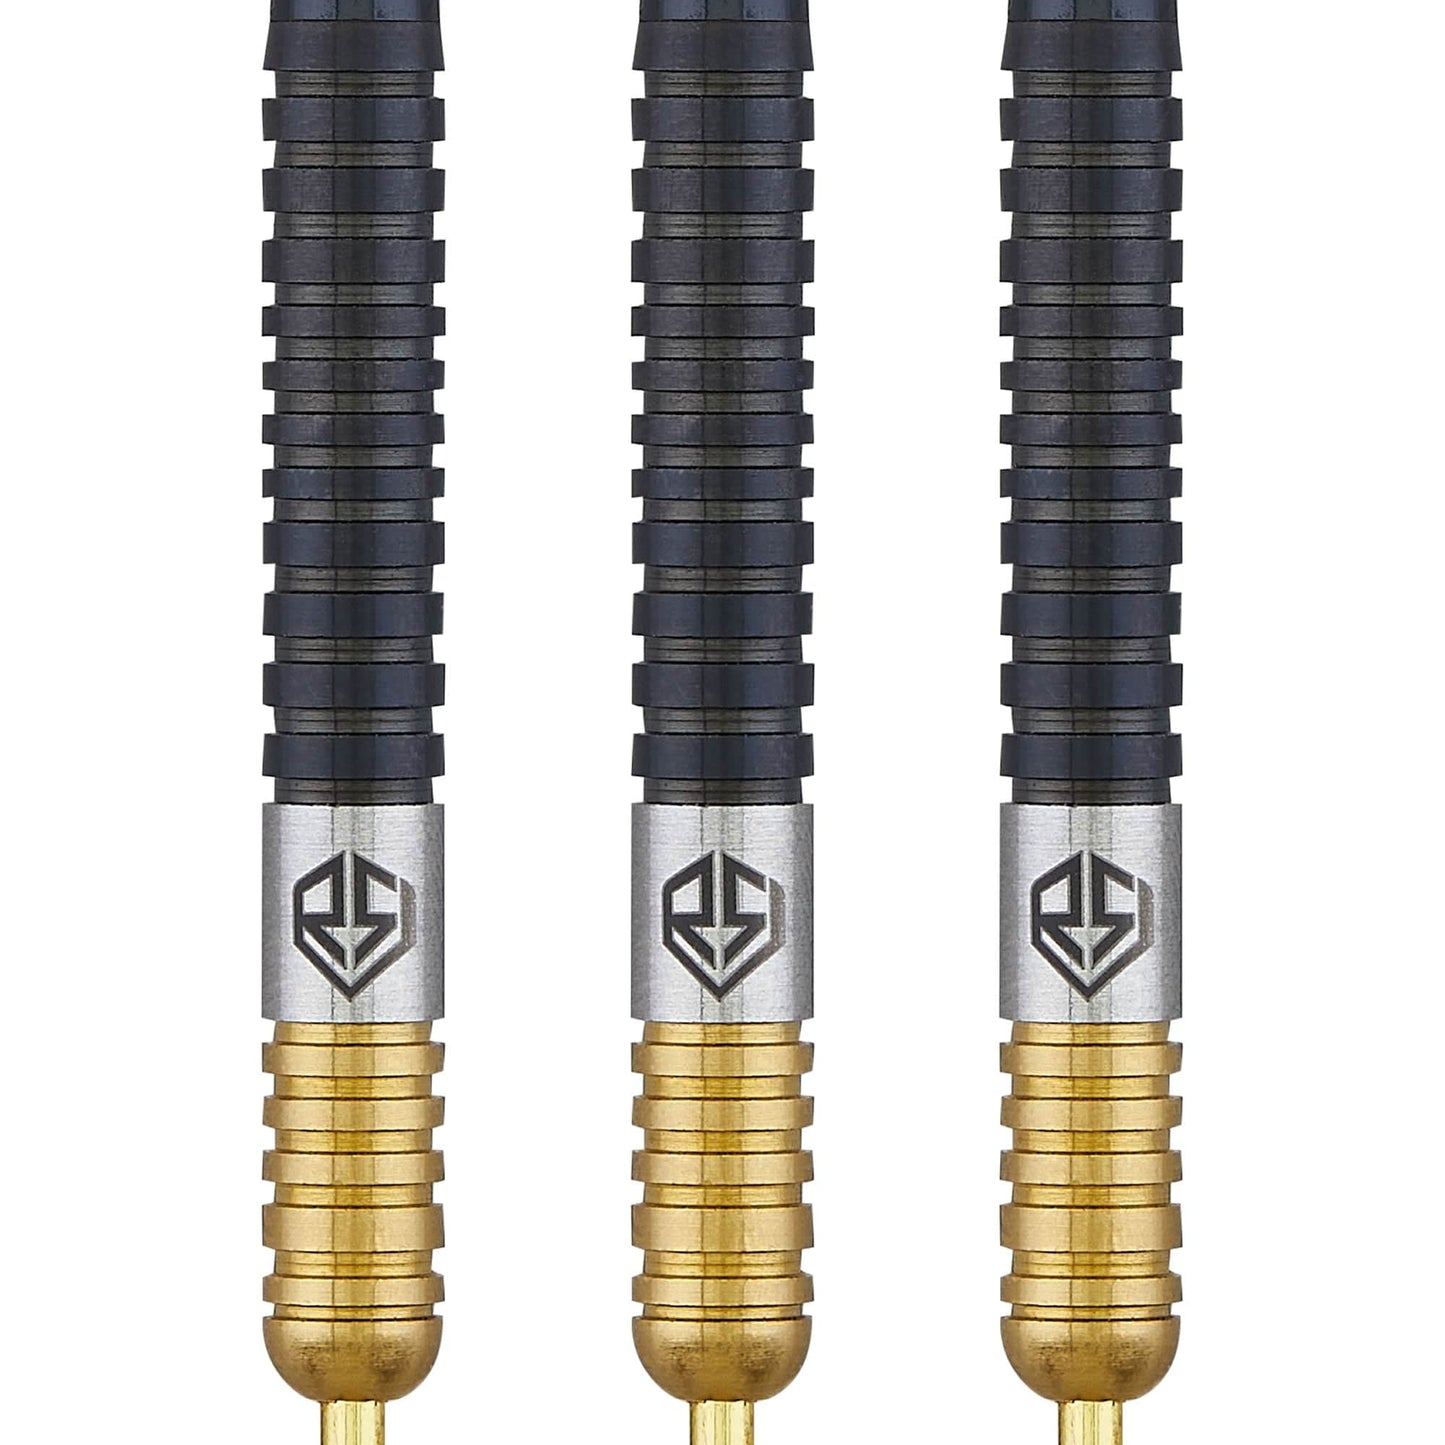 Unicorn Ross Smith Darts - Steel Tip - Smudger - Two Tone - Black & Gold